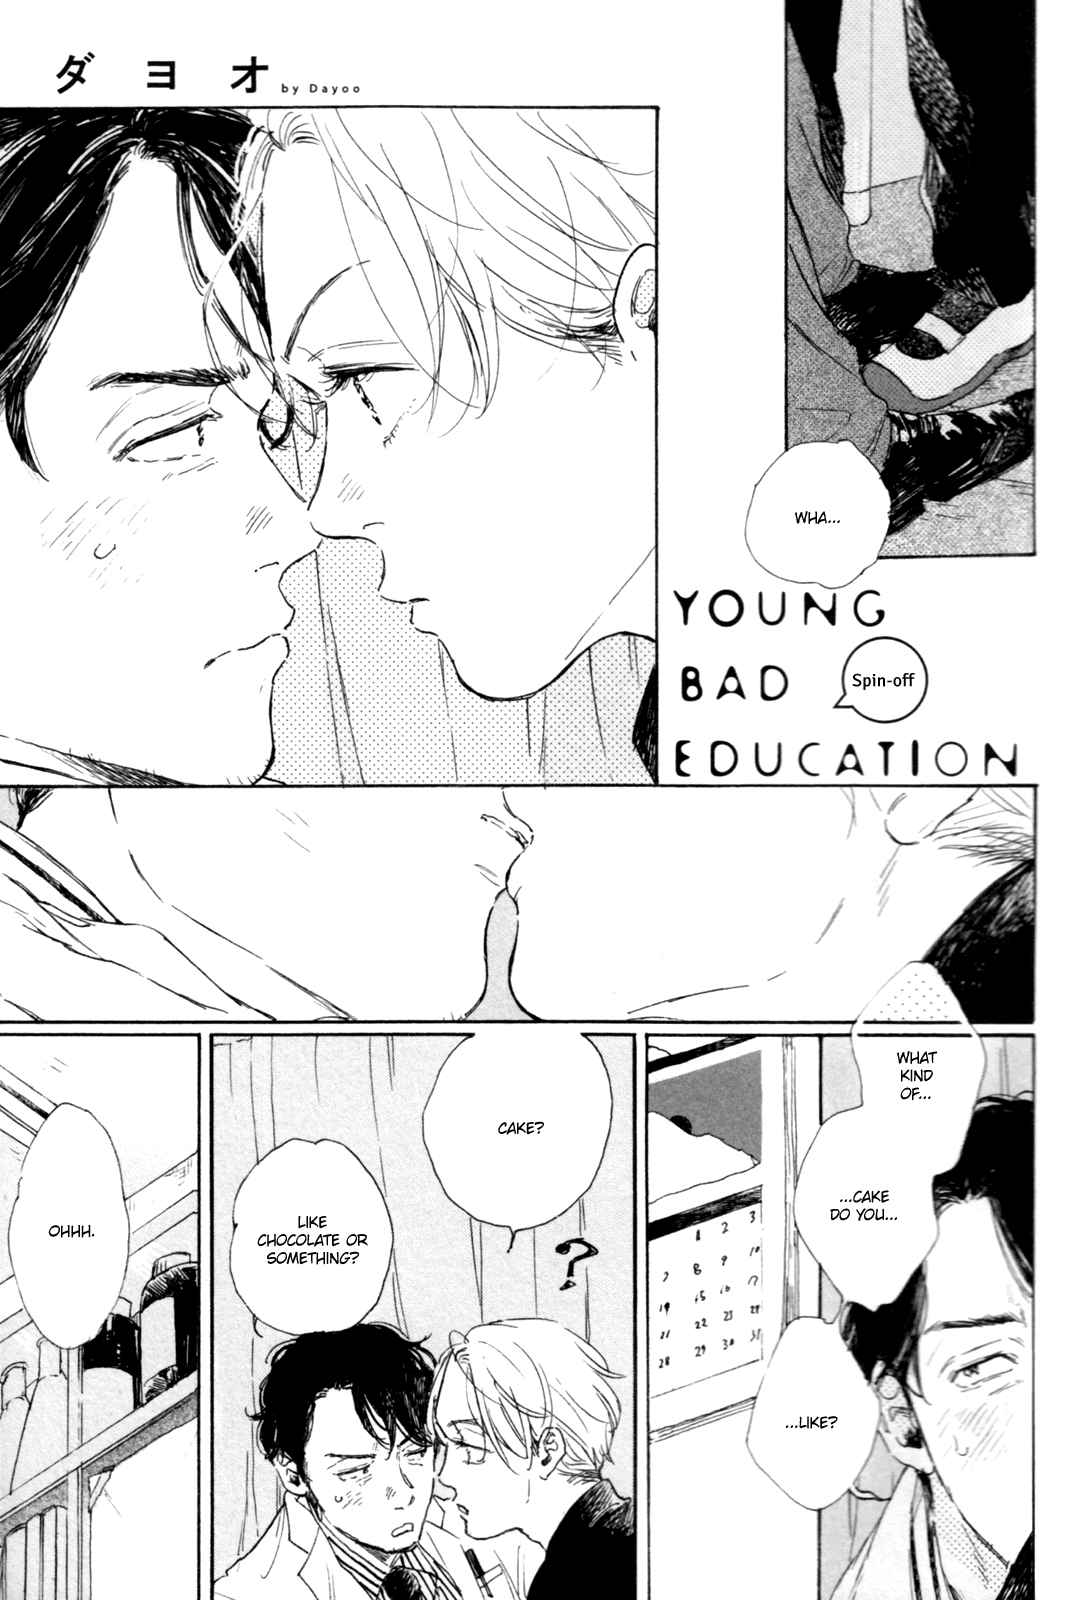 Young Bad Education Vol. 1 Ch. 2.6